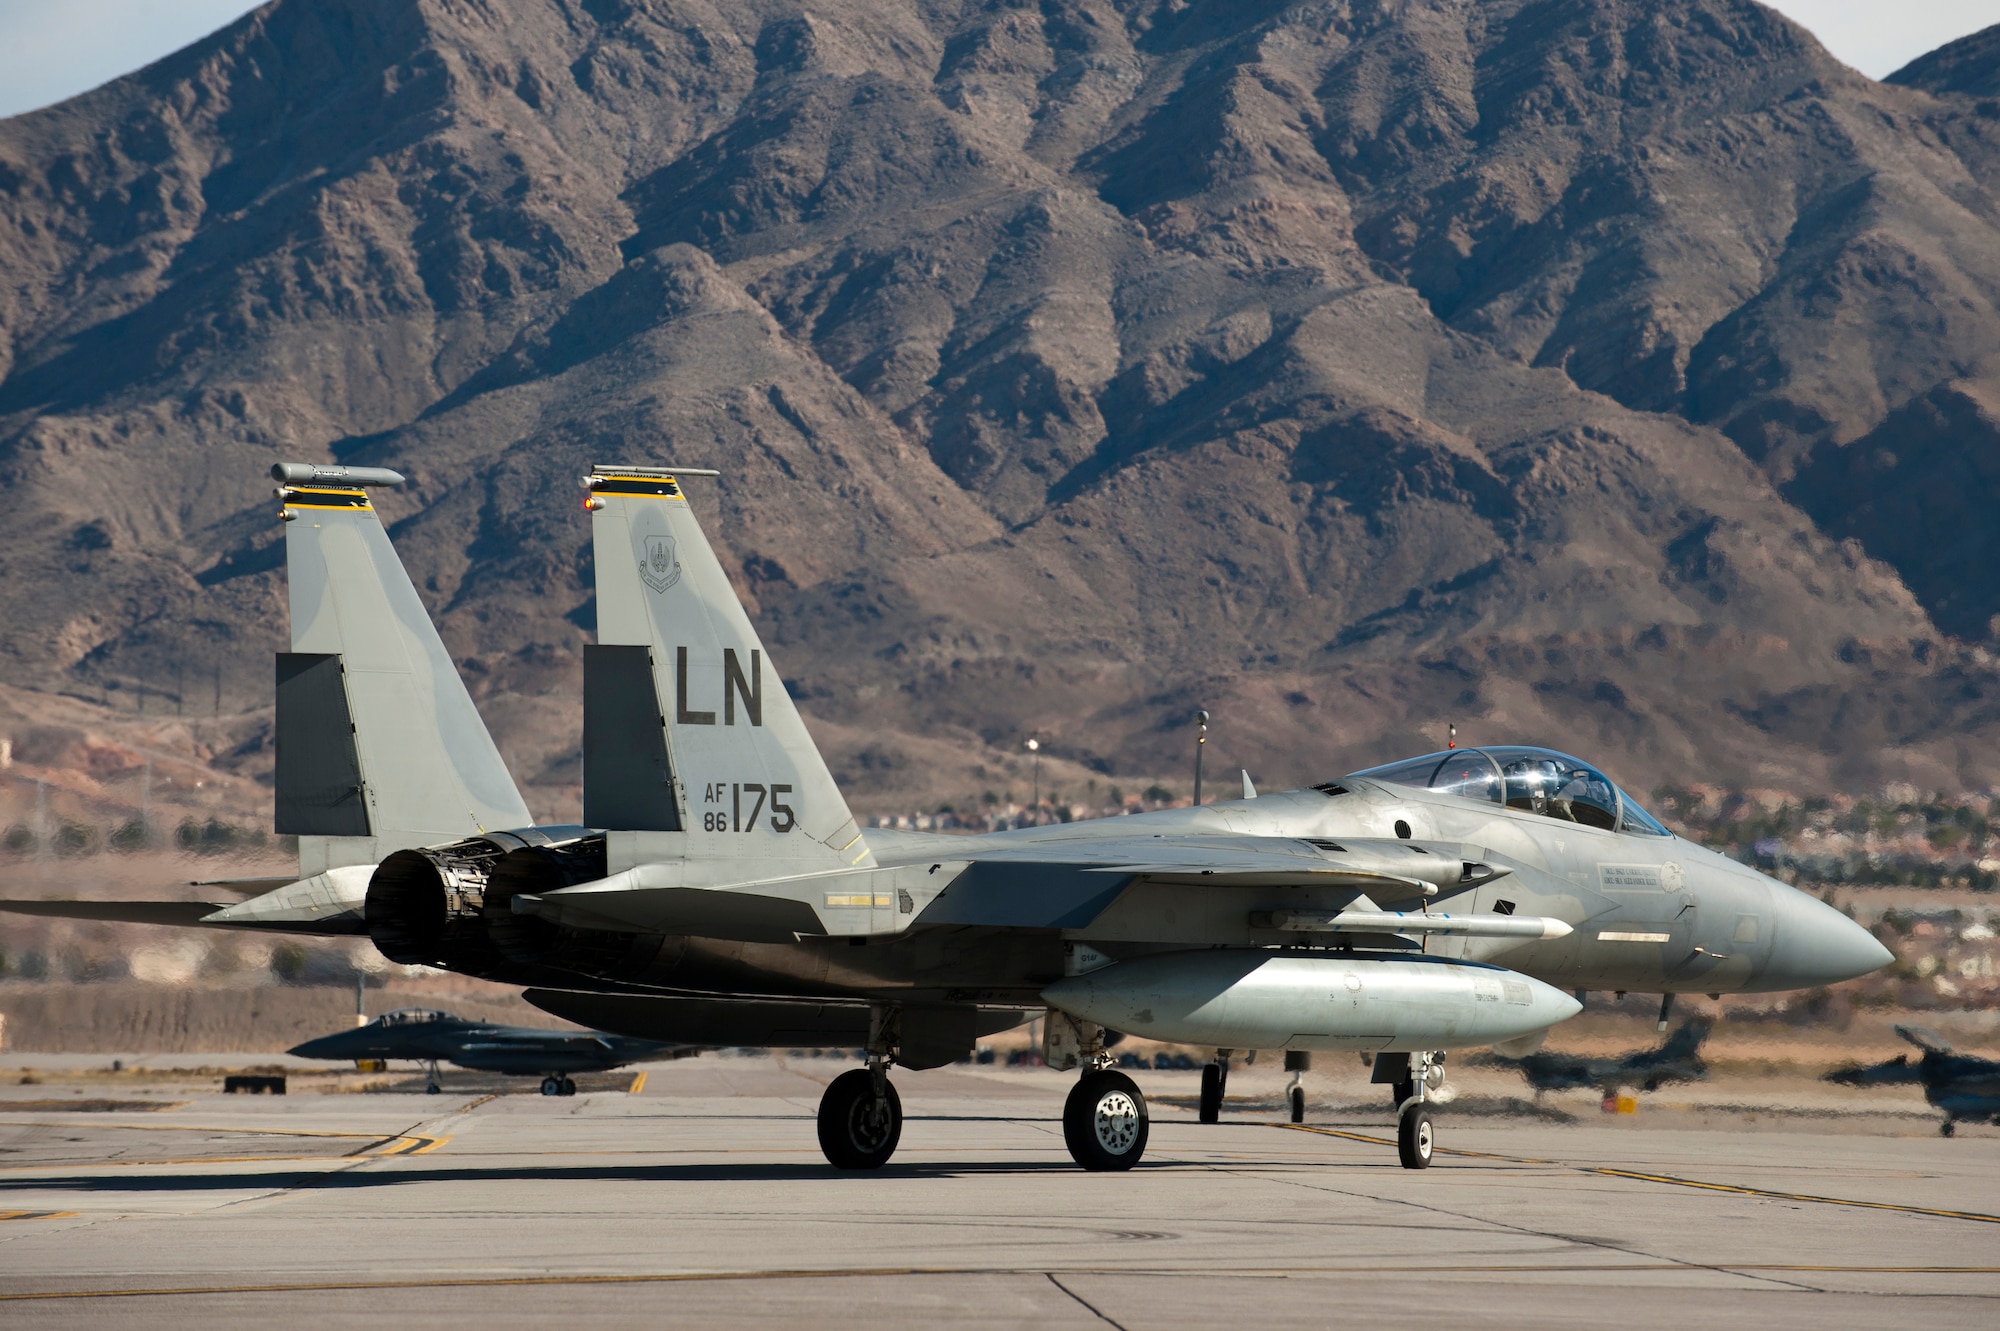 An F-15C Eagle assigned to the 493rd Fighter Squadron, Royal Air Force Lakenheath, England, taxis to the runway during Red Flag 15-1 at Nellis Air Force Air Force Base, Nev., Feb. 6, 2015. Red Flag provides realistic combat training in a contested, degraded and operationally limited environment. (U.S. Air Force photo by Senior Airman Thomas Spangler)